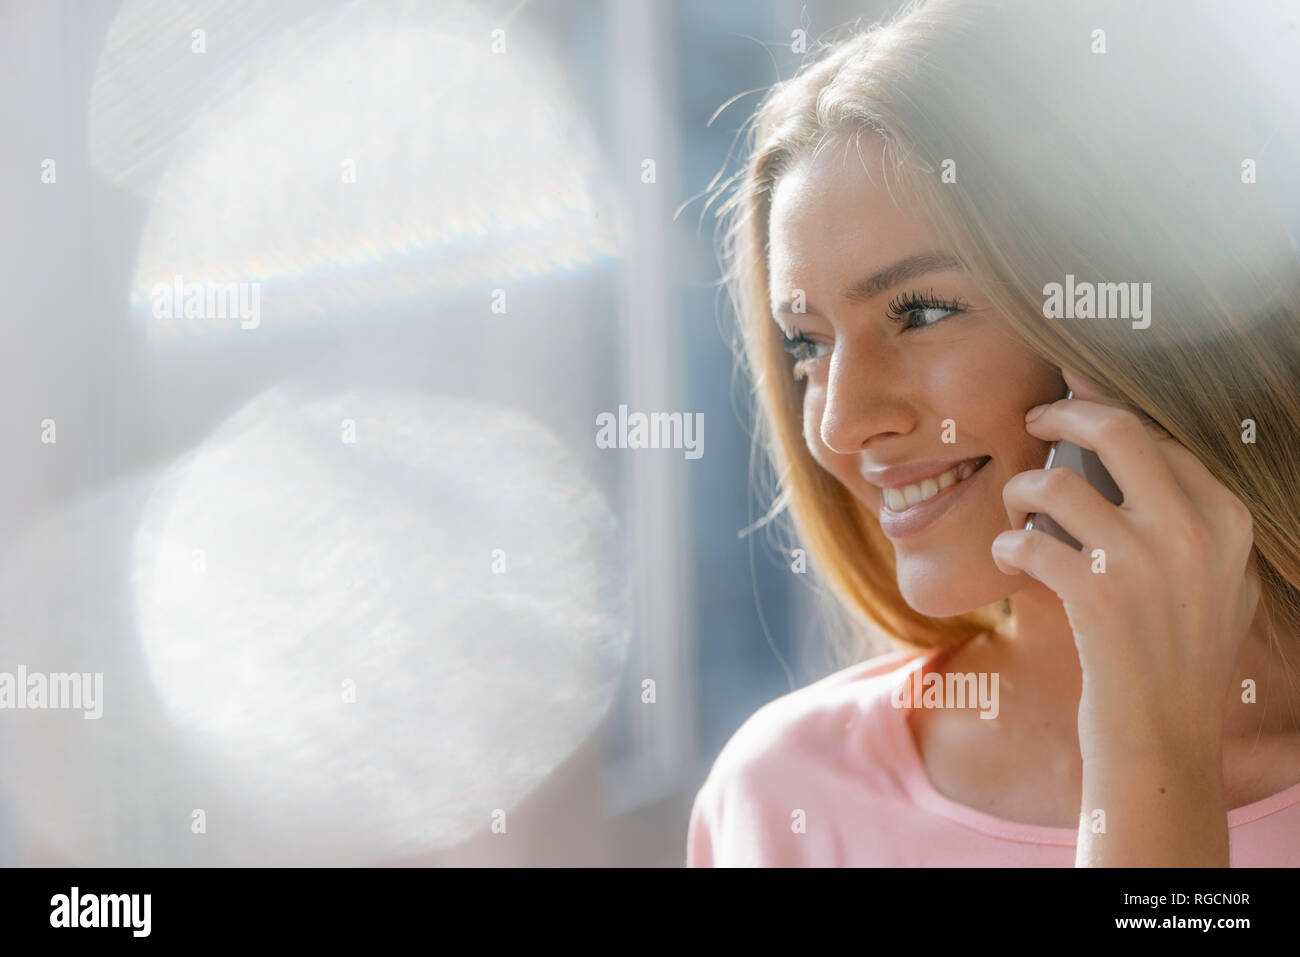 Portrait of smiling young woman on the phone Stock Photo